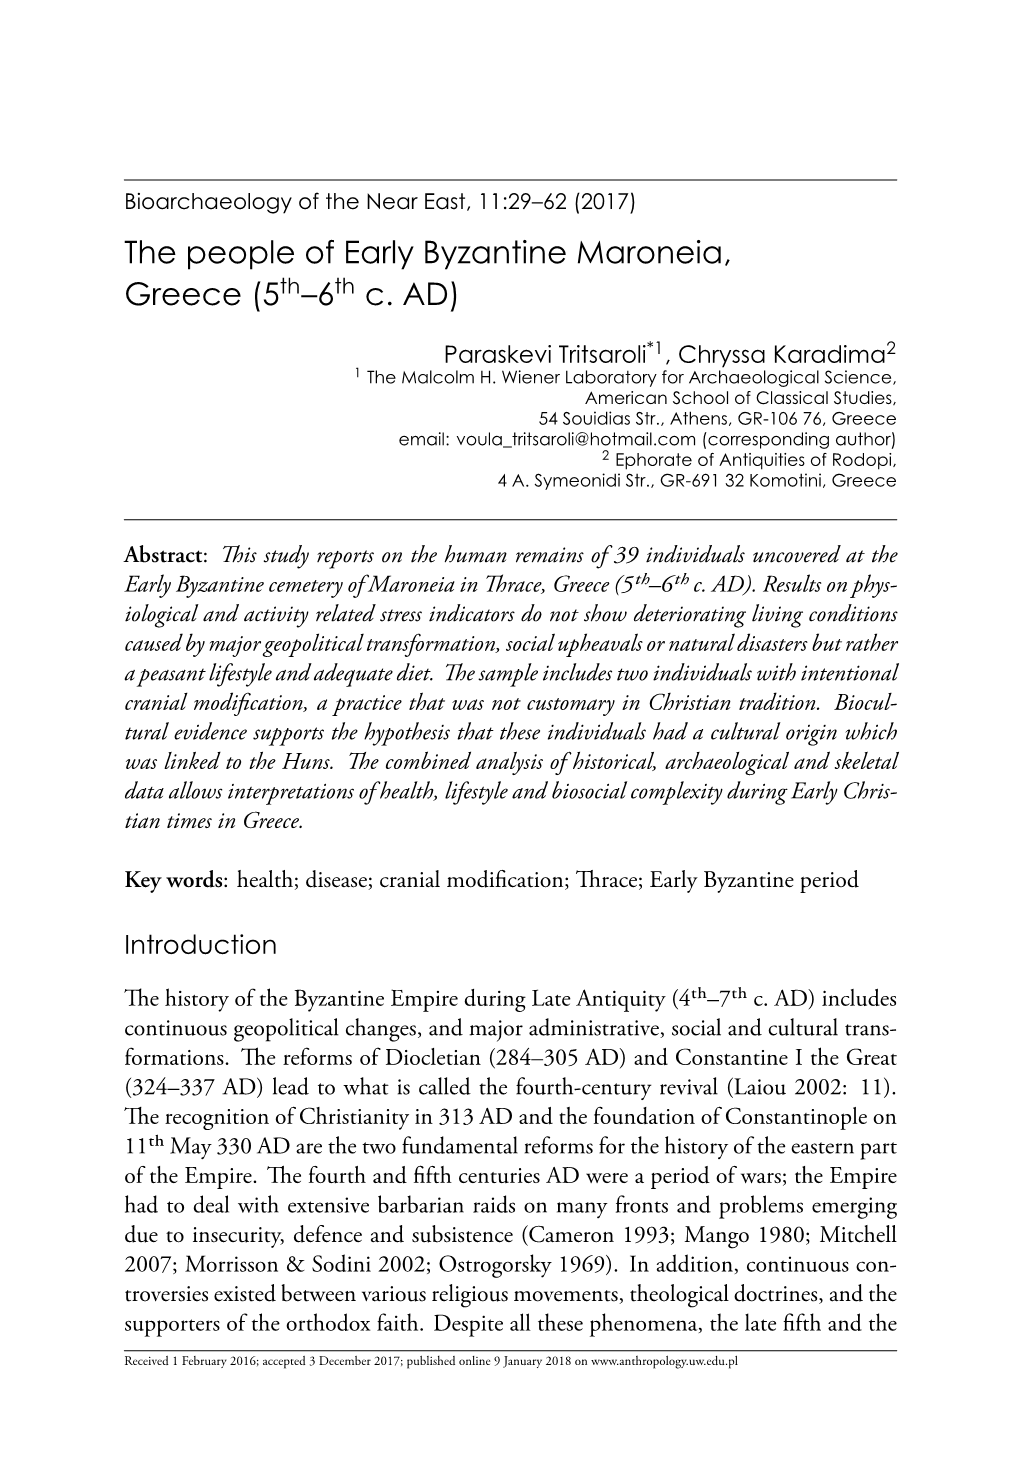 The People of Early Byzantine Maroneia, Greece (5Th-6Th C